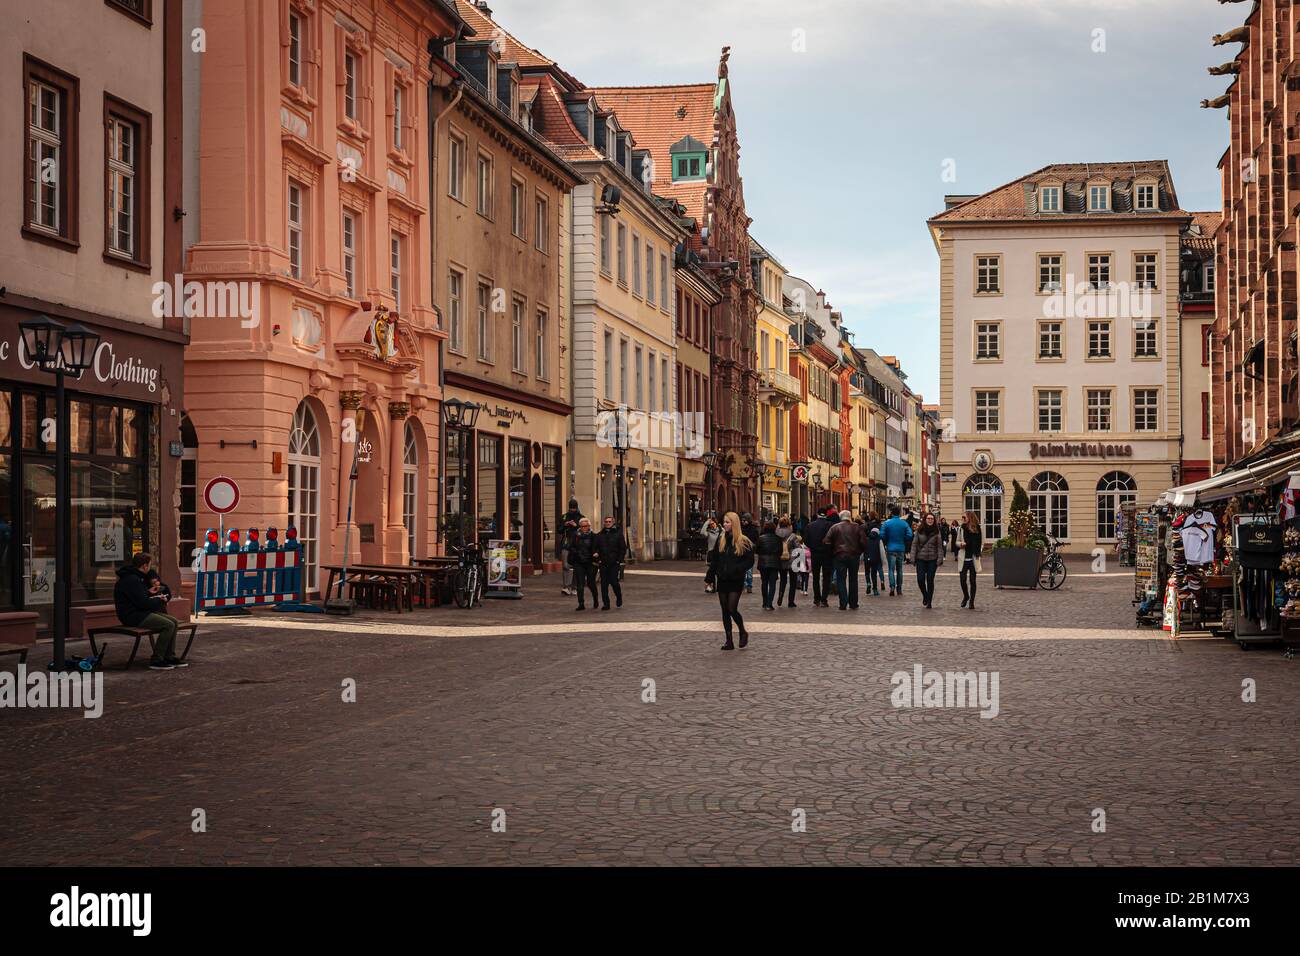 Heidelberg, Germany, February 22, 2020: Pedestrians on market square in old town Stock Photo